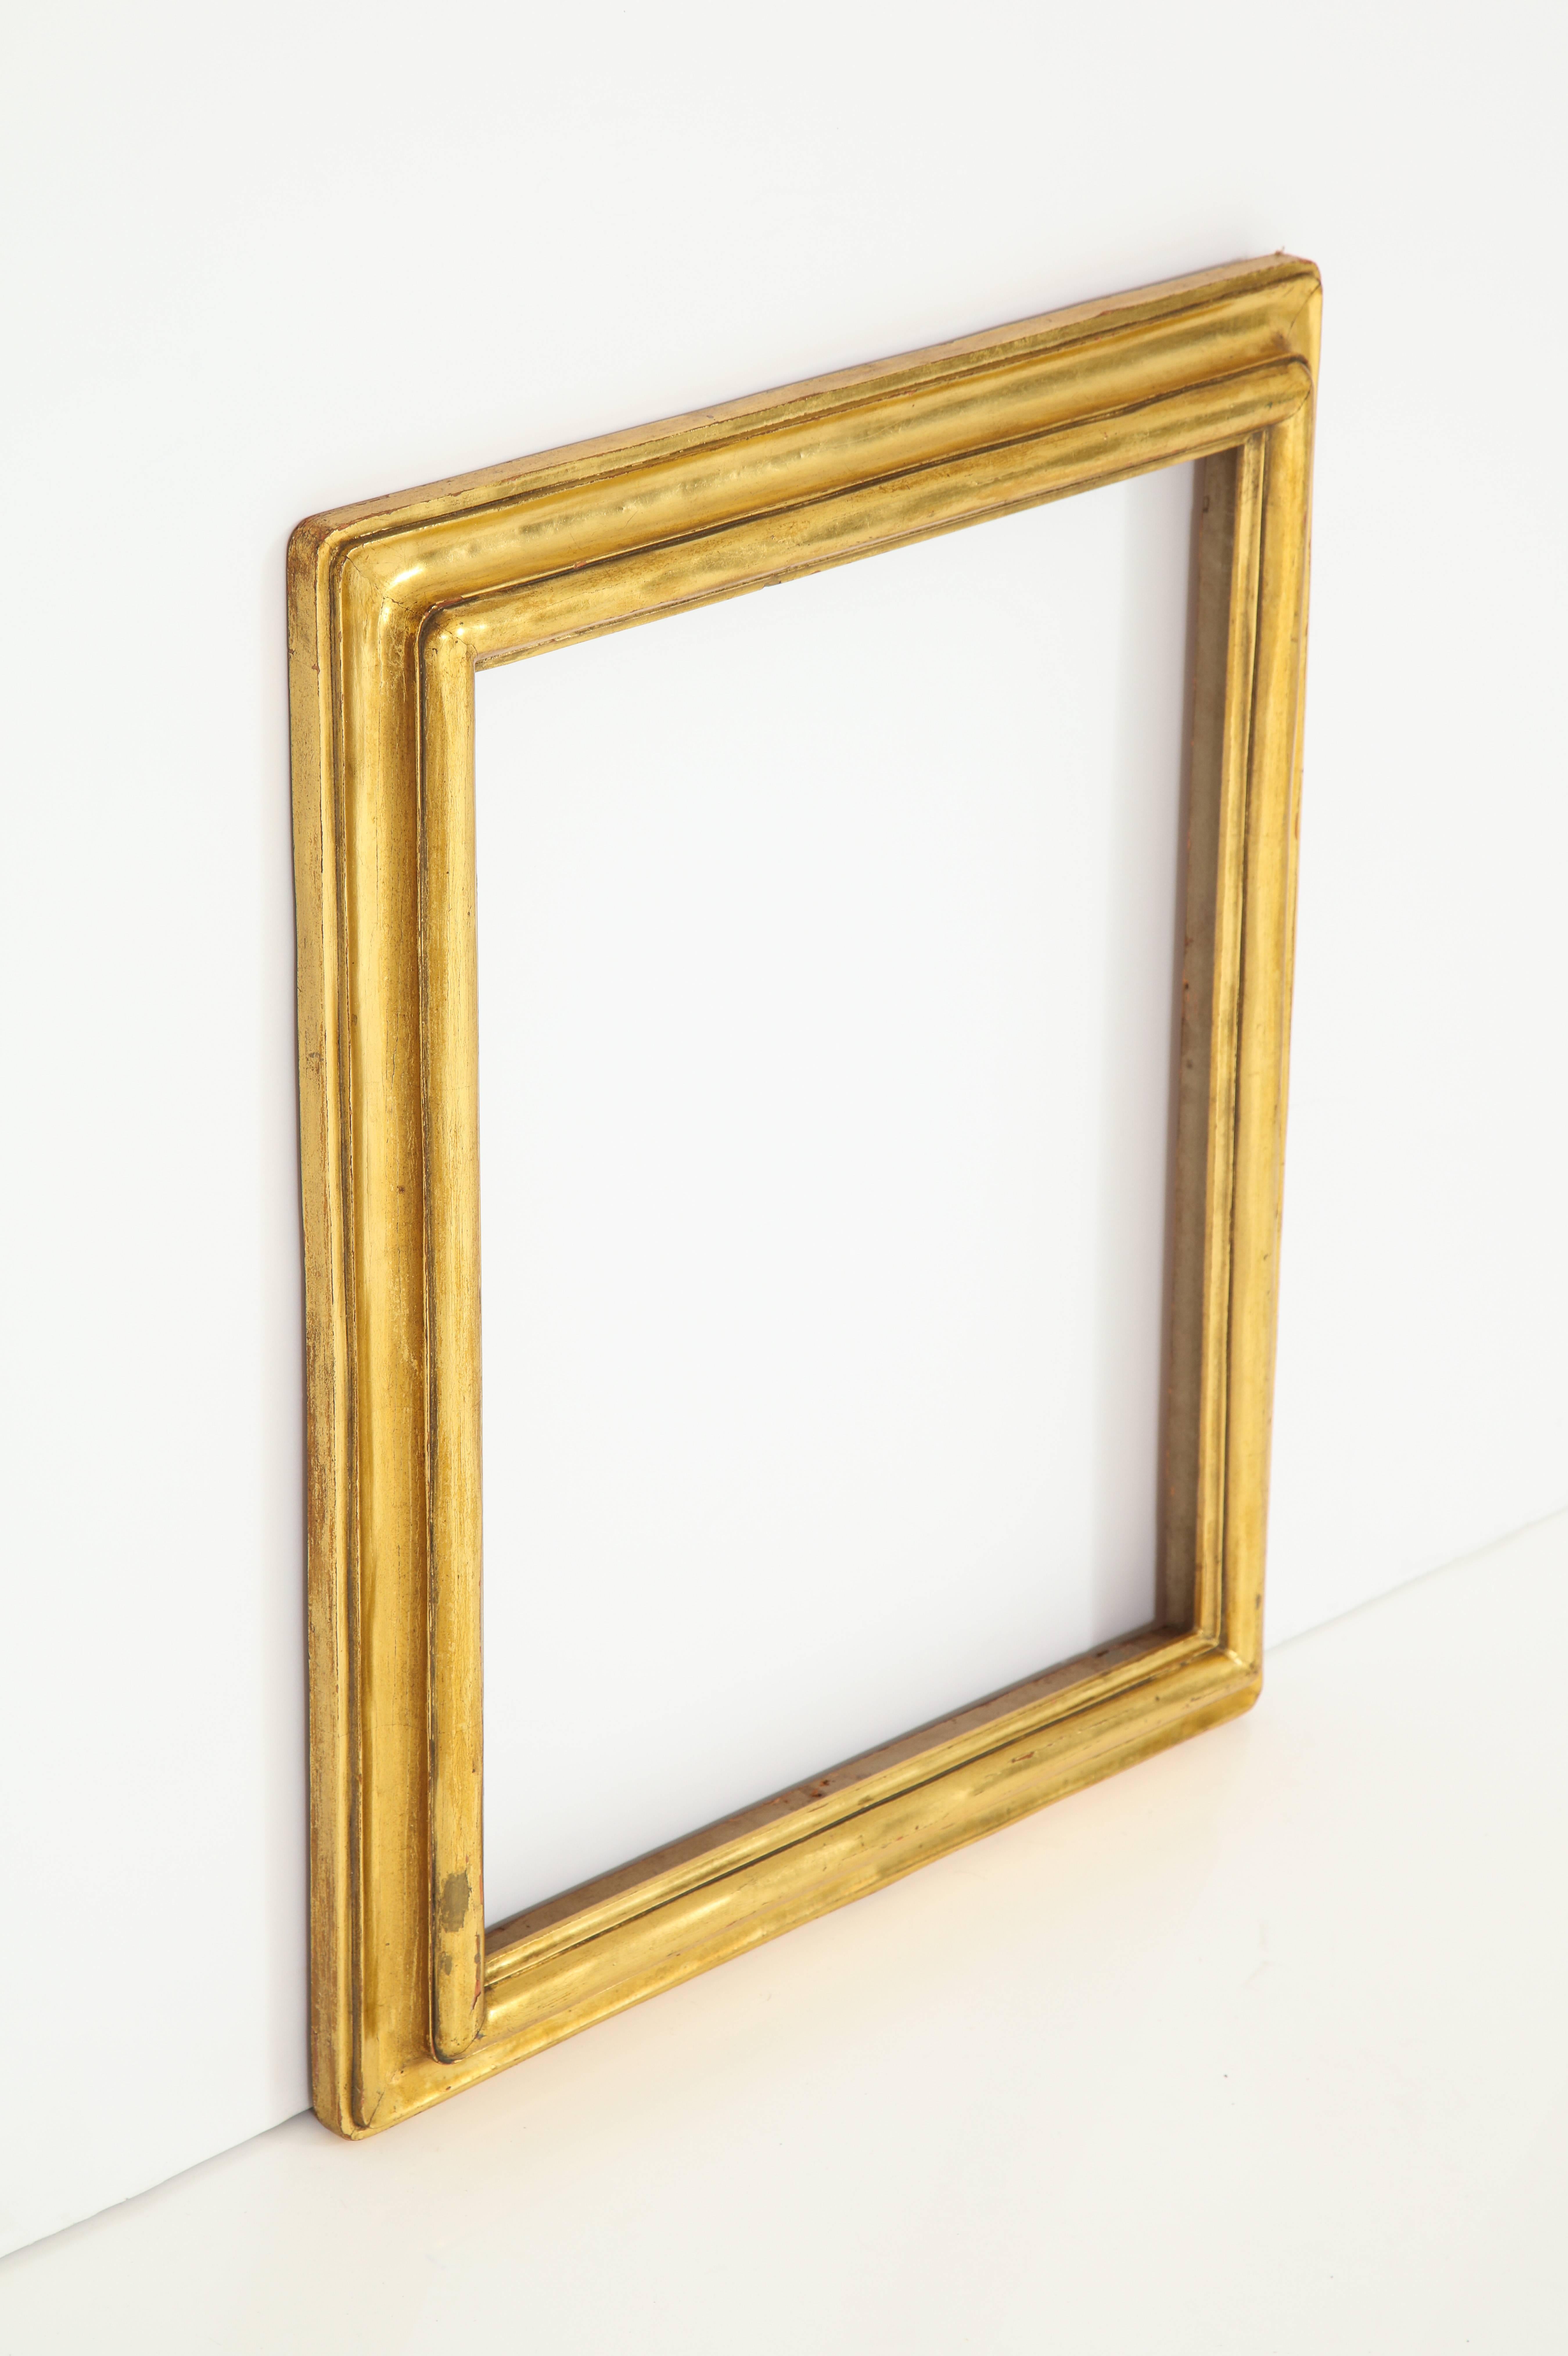 A beautifully gilded American Arts and Crafts frame.
Made by Foster Brothers
American, circa 1904.
Size: 24" high x 20" wide x 2 1/2" deep.